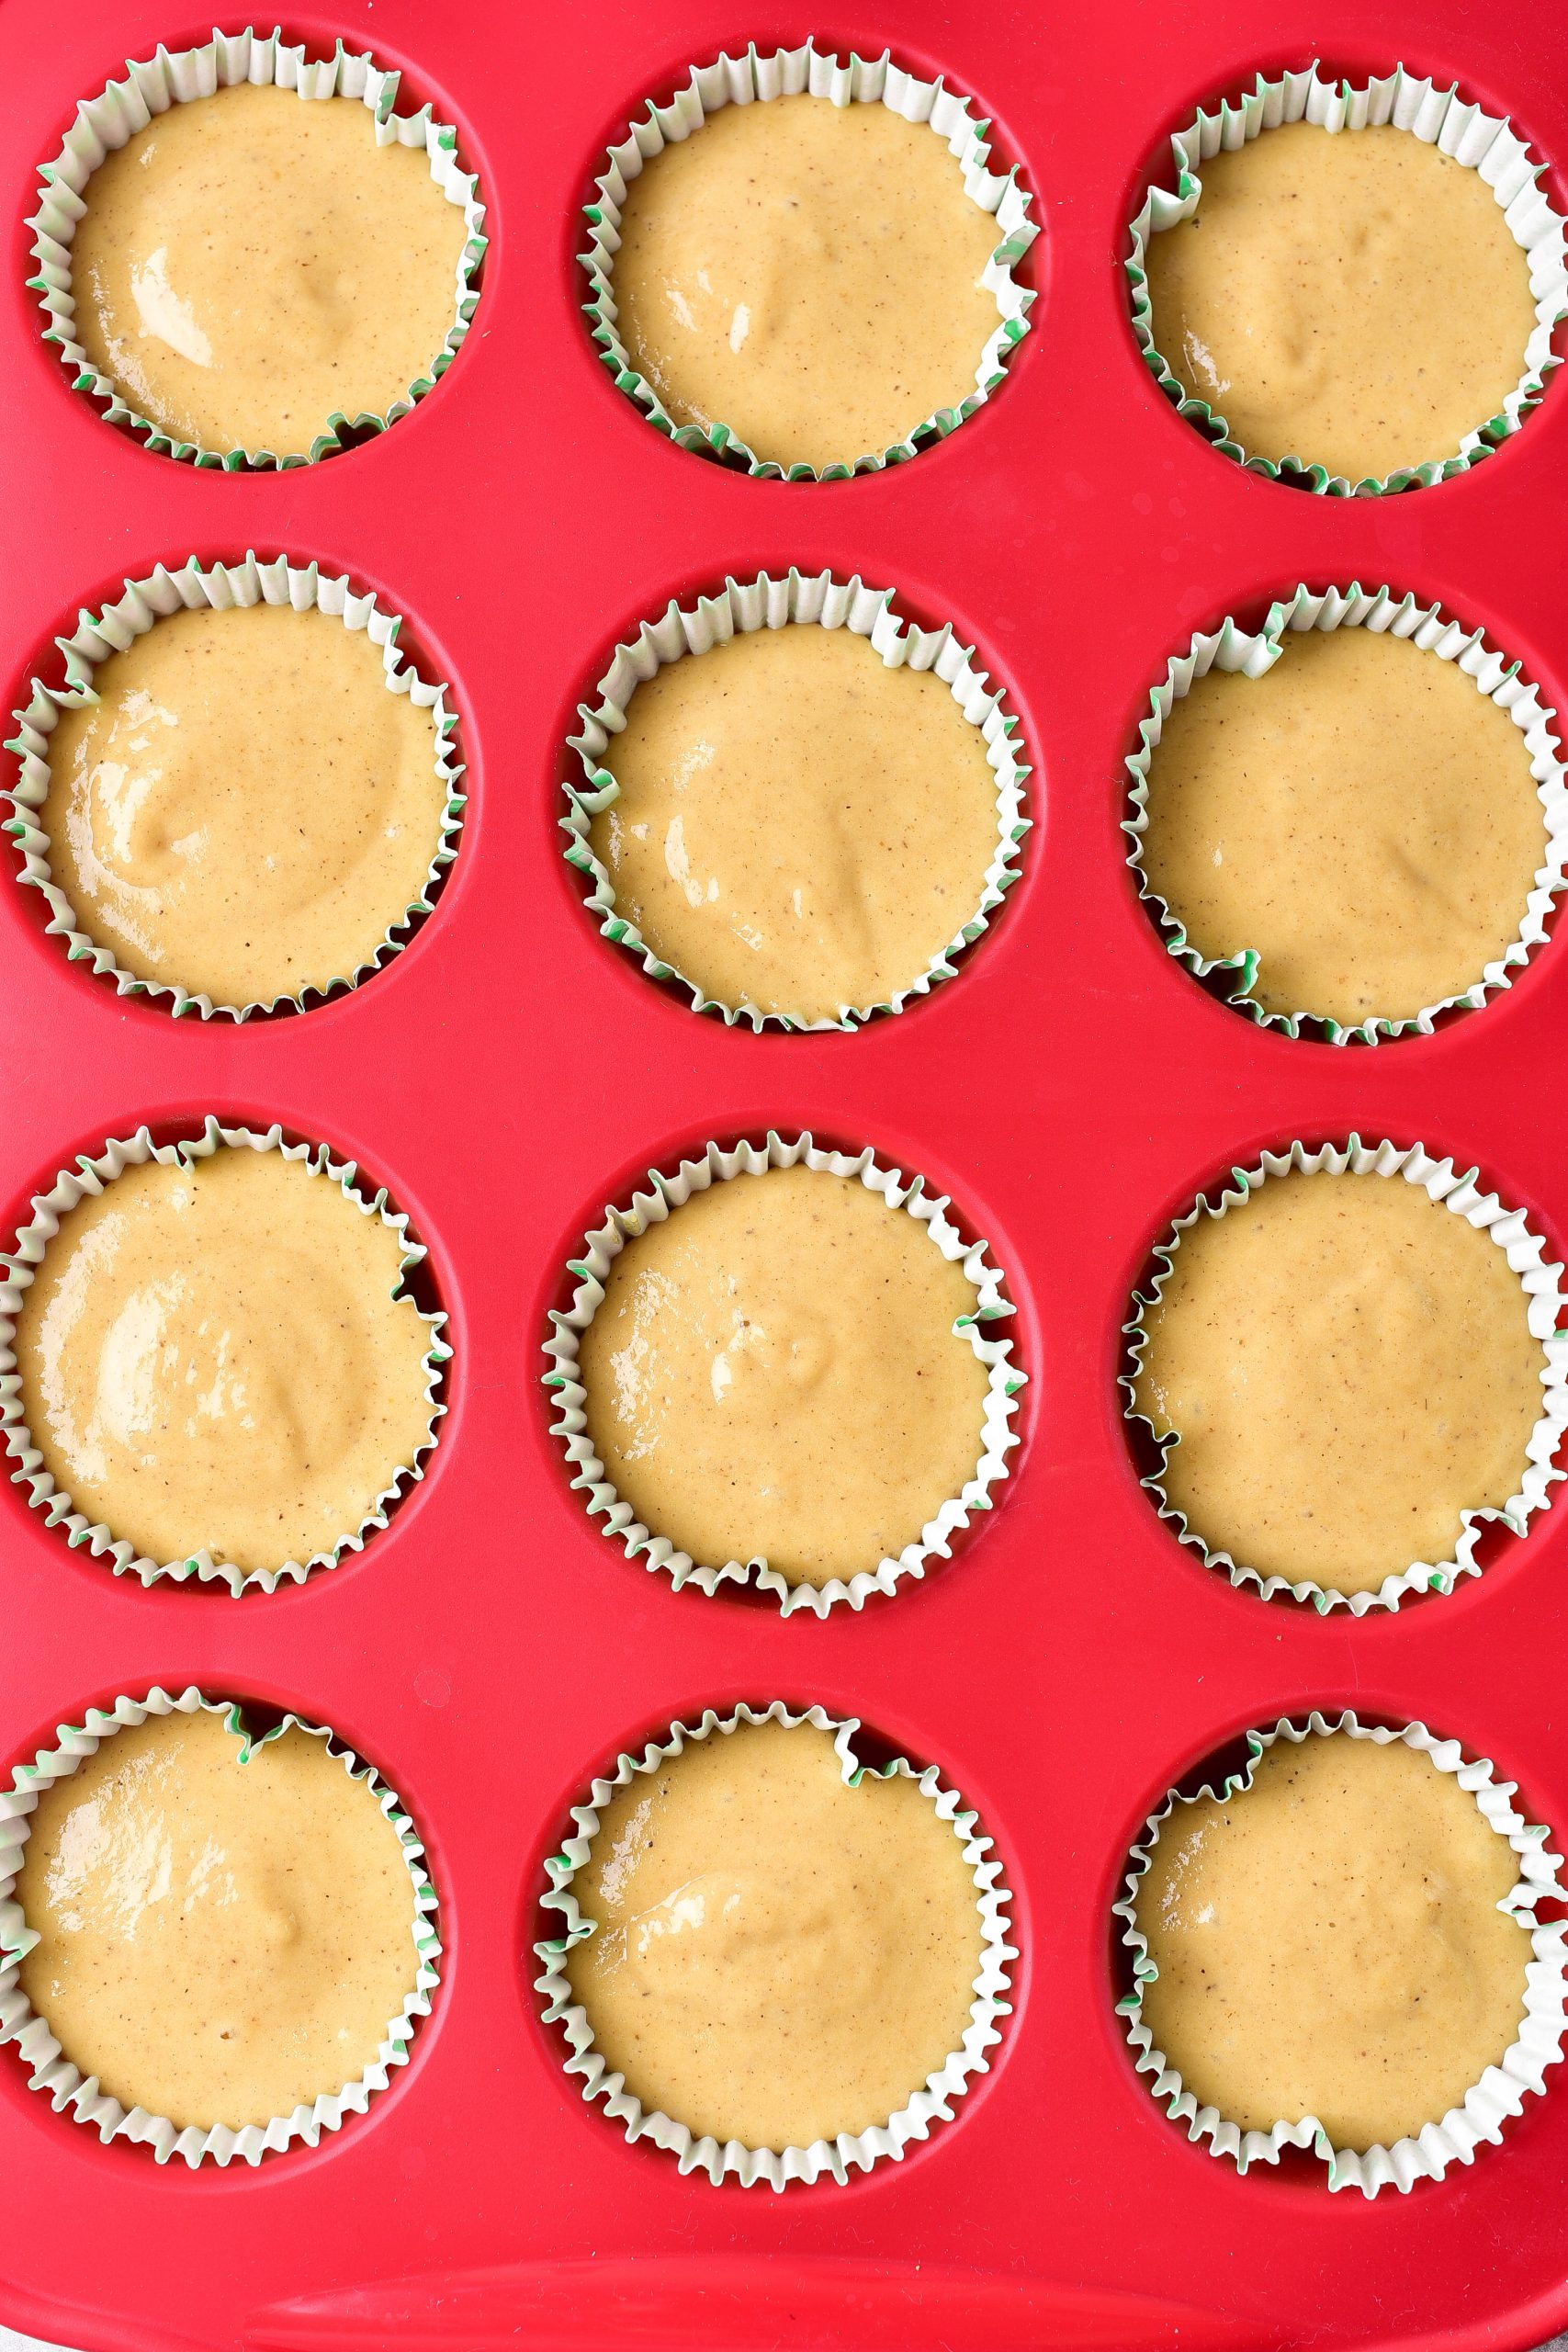 Spread the batter into the cupcake liners in the muffin tin. 